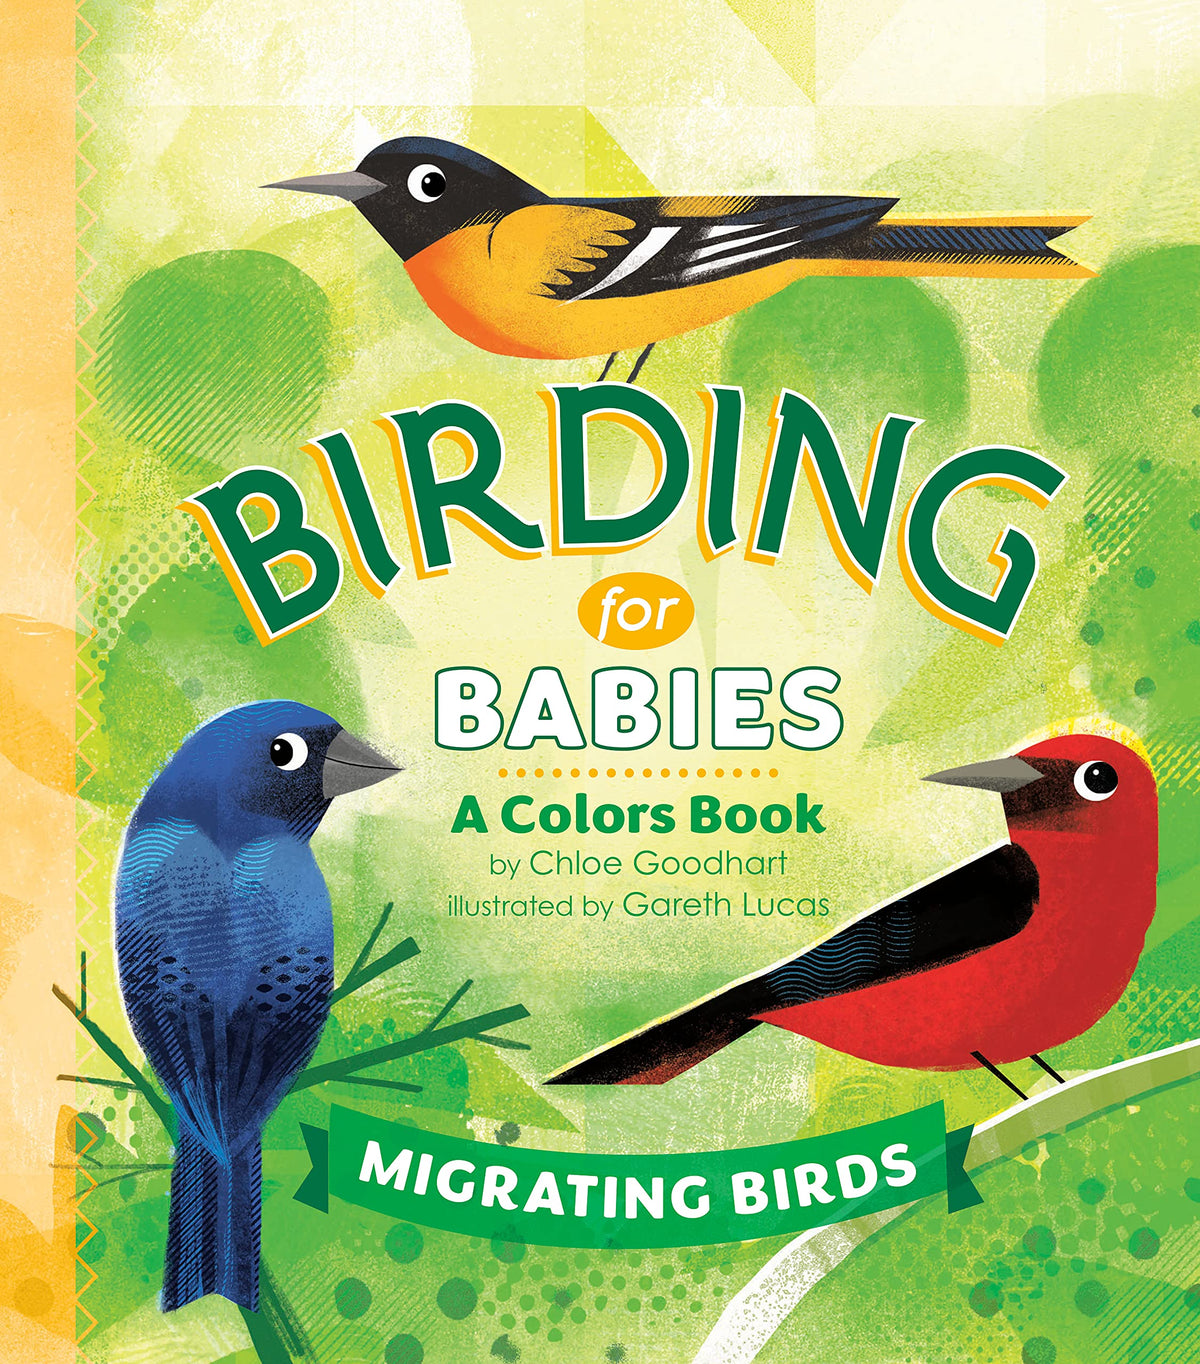 Birdling For Babies: A Colors Book